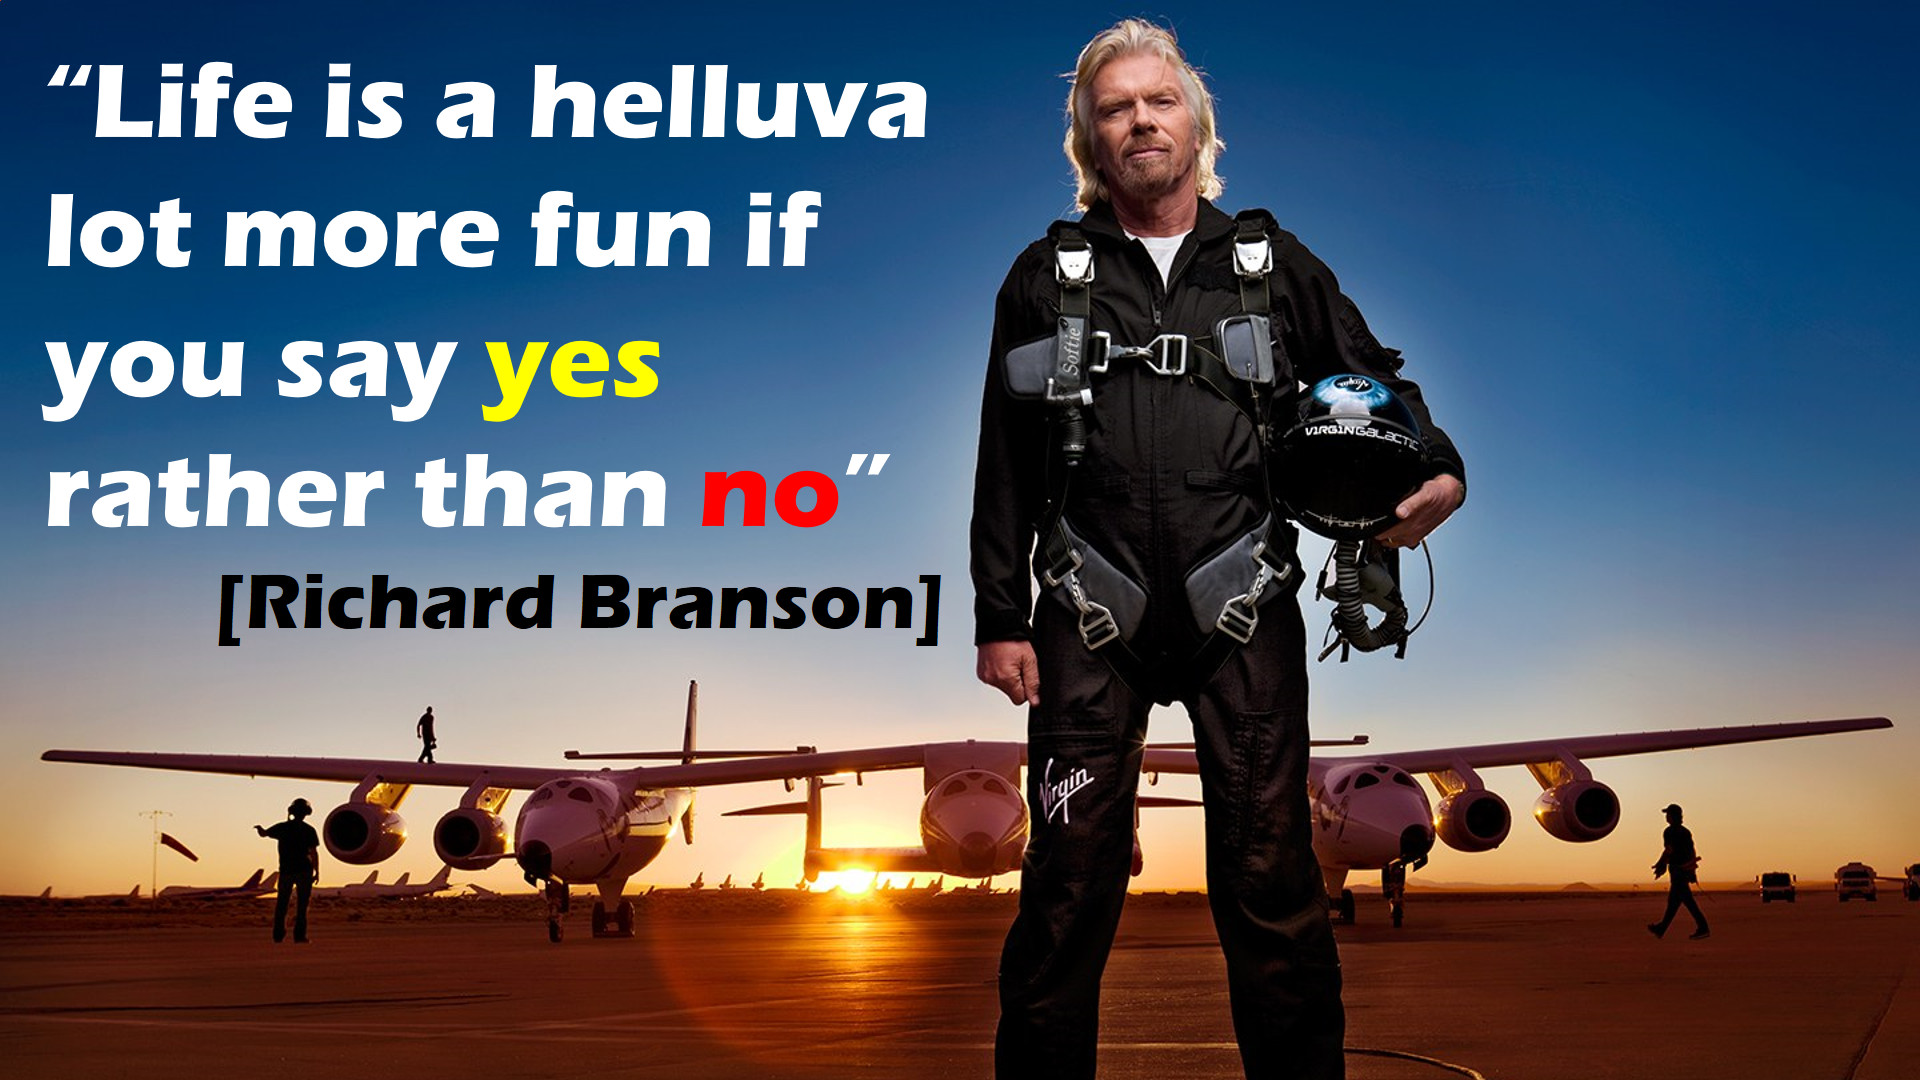 Life is a helluva lot more fun if you say YES rather than no. Richard Branson